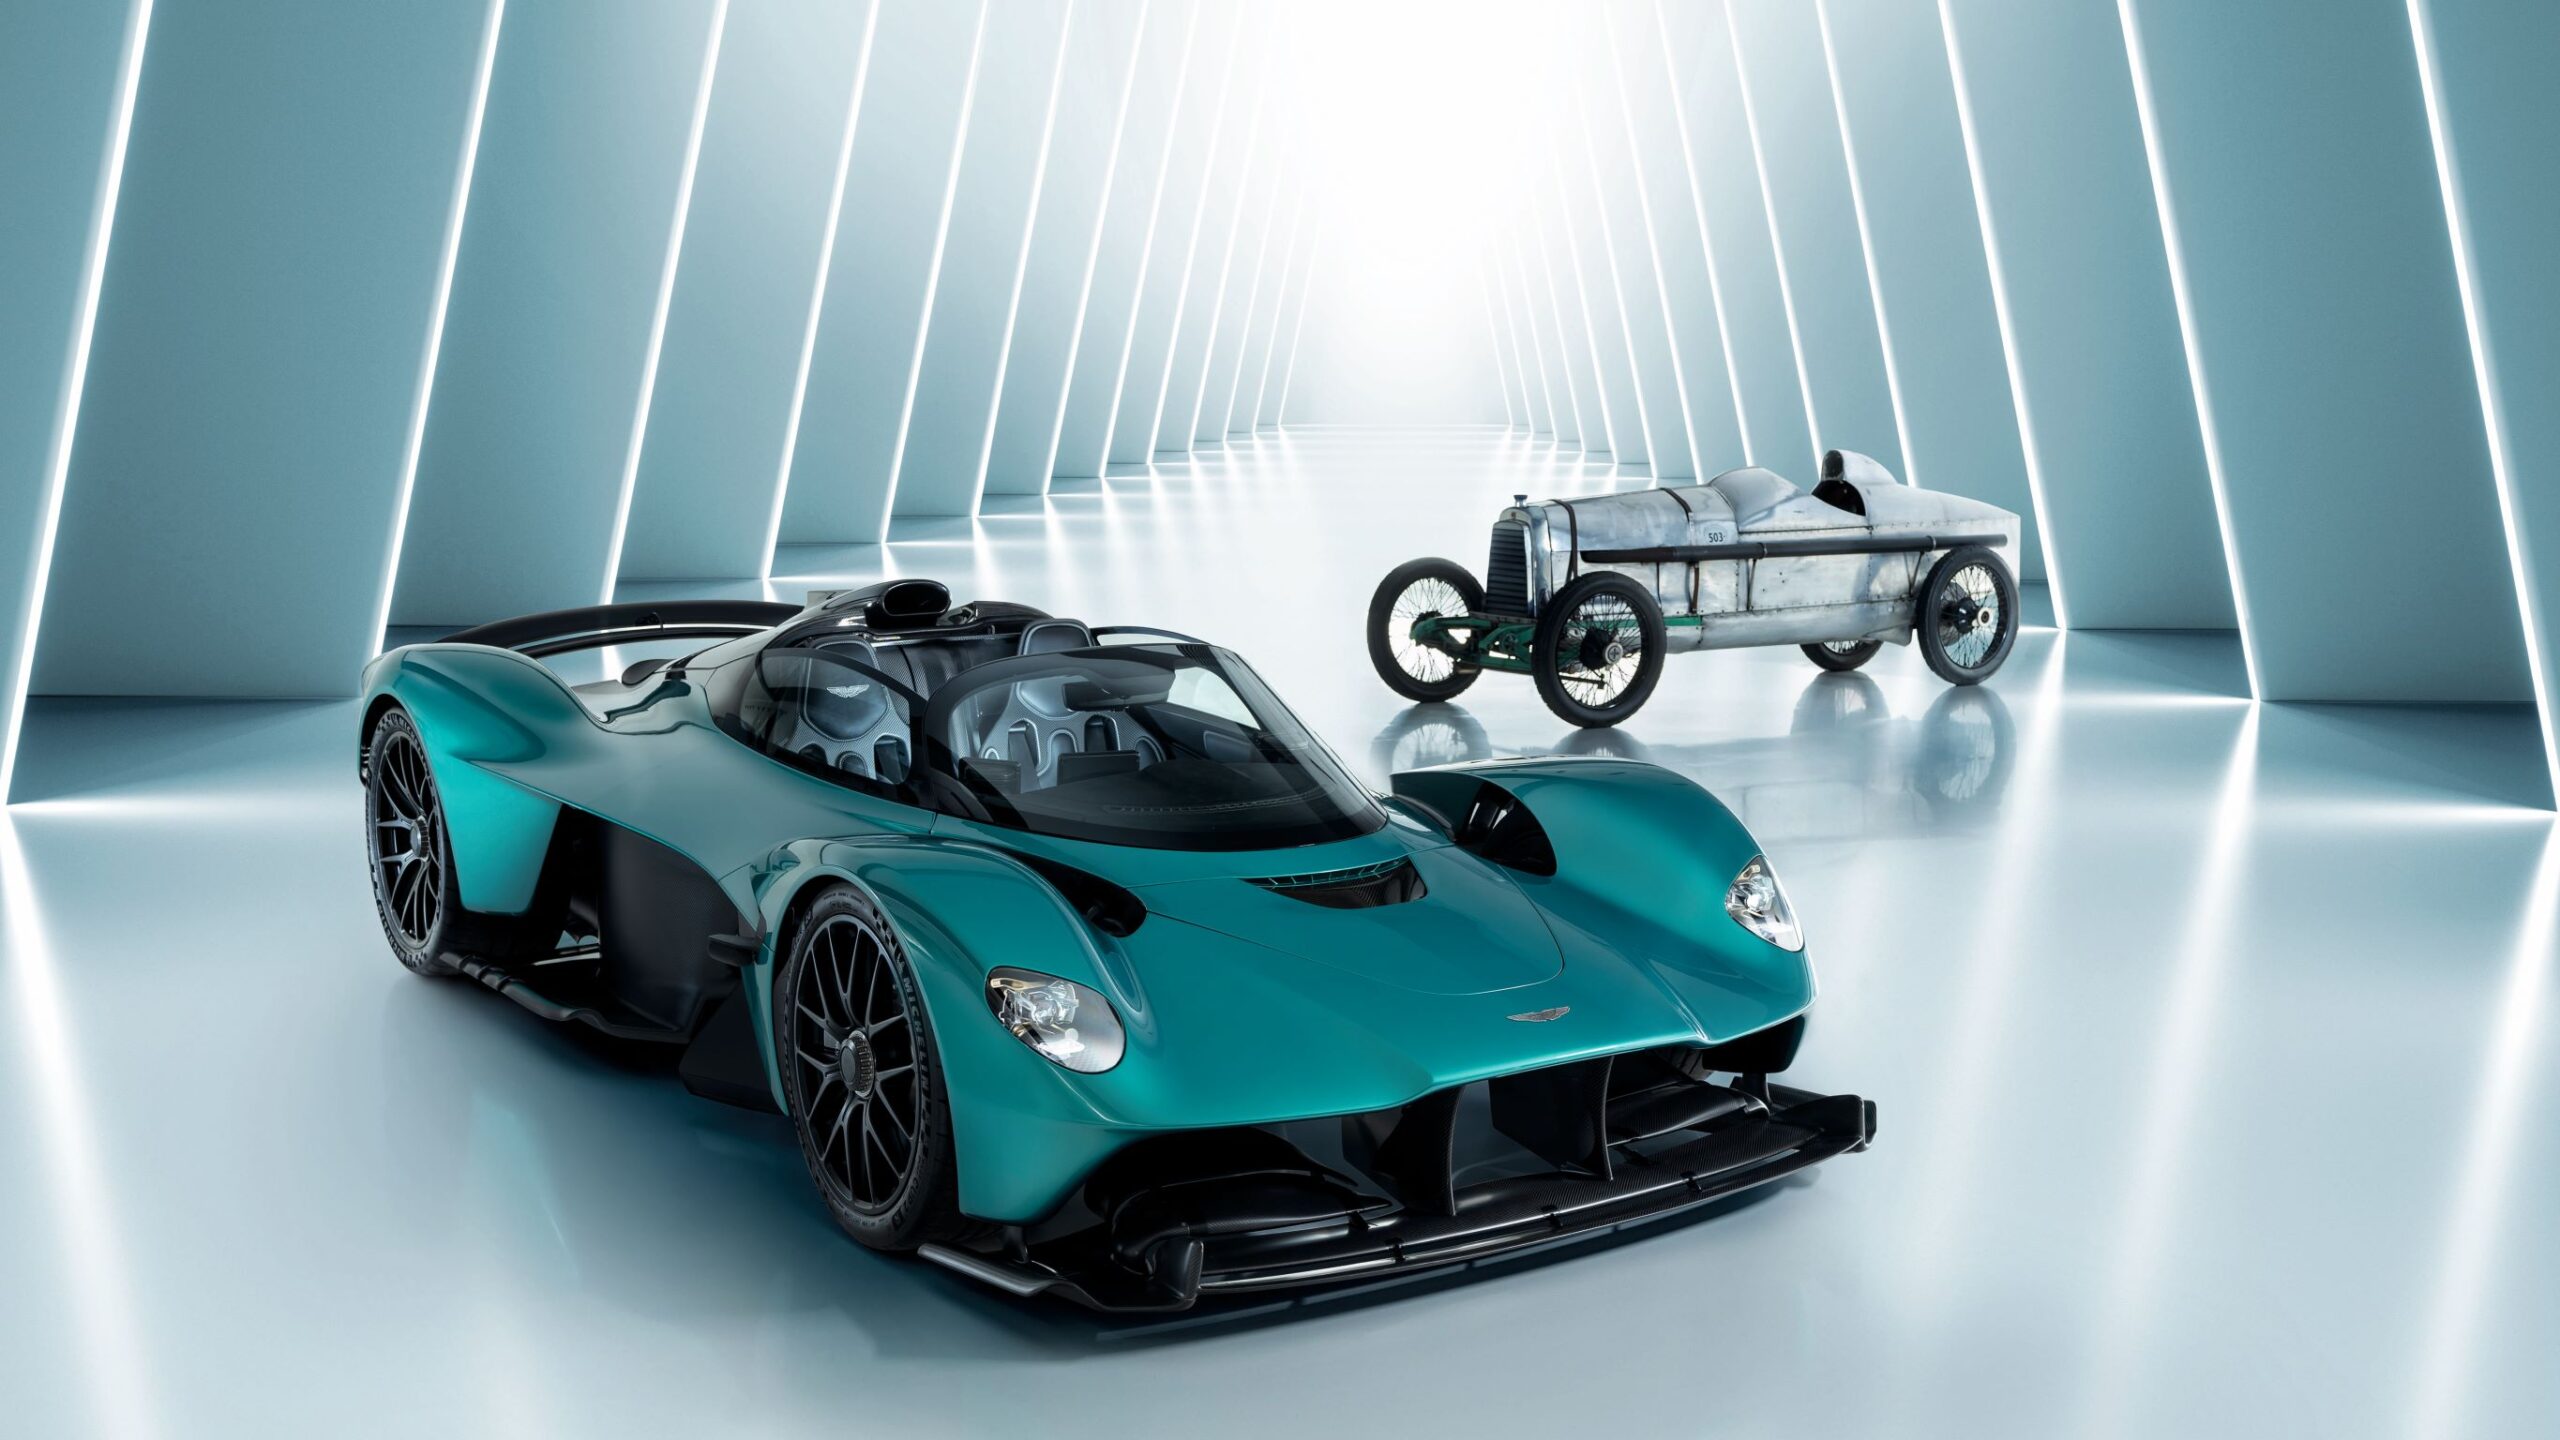 Zoomed out view of an Aston Martin Valkyrie and an Aston Martin Razor Blade racecar.